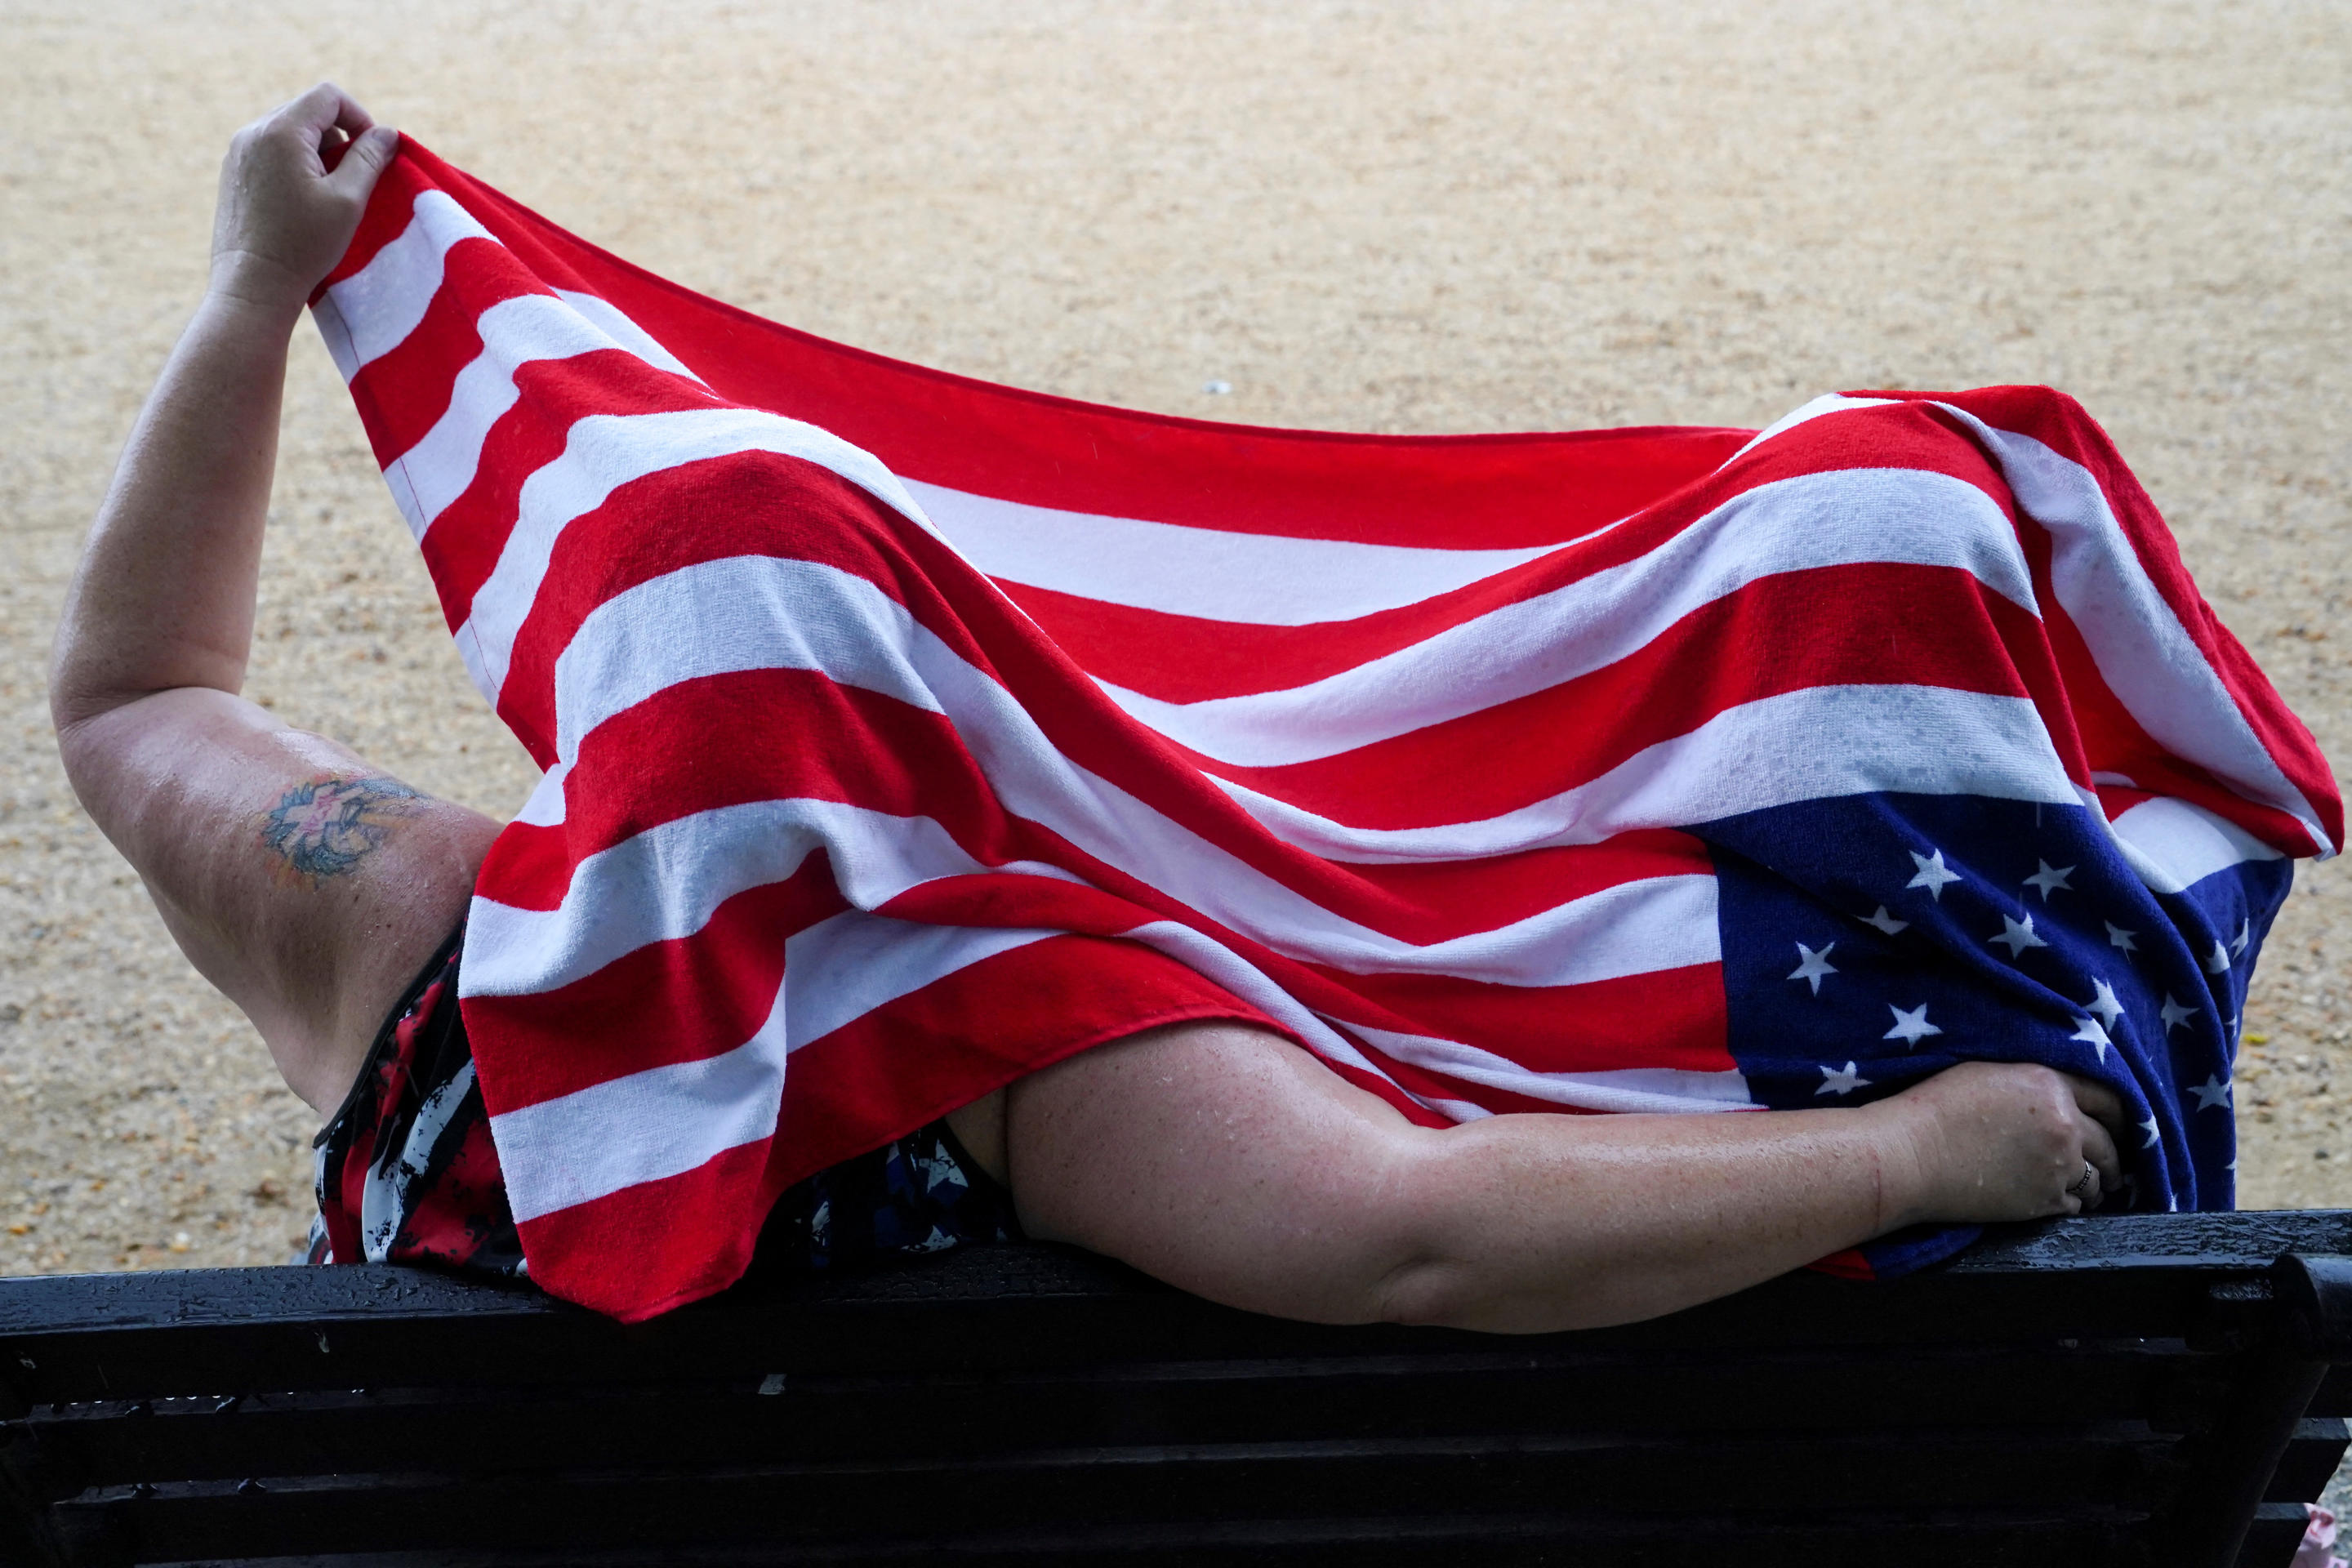 Two people with an American flag towel draped over their heads.